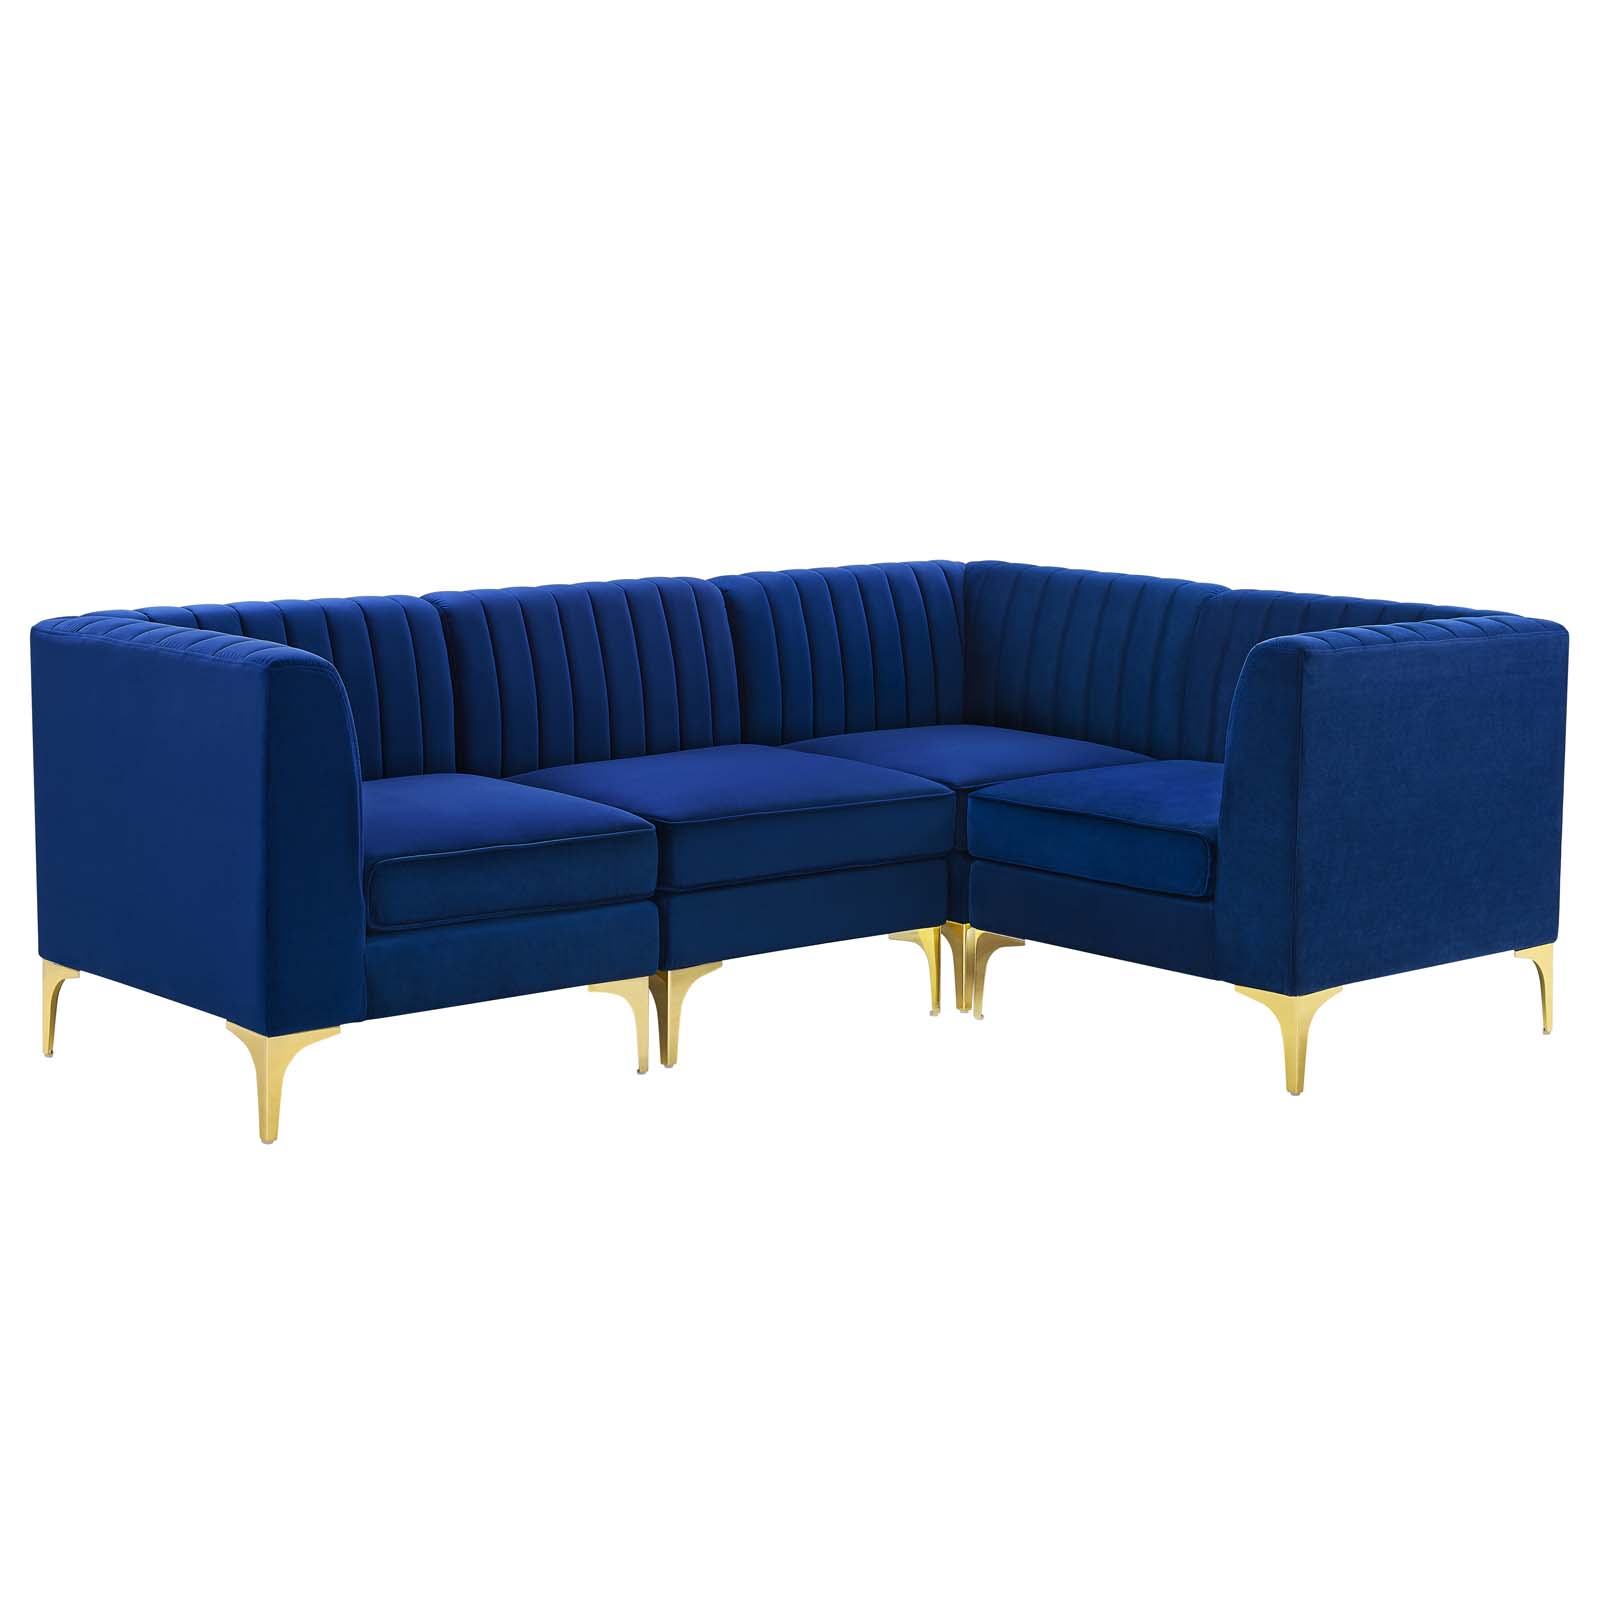 Modway Triumph 4-Piece Channel Performance Velvet Tufted Sectional Sofa in Navy - image 2 of 9